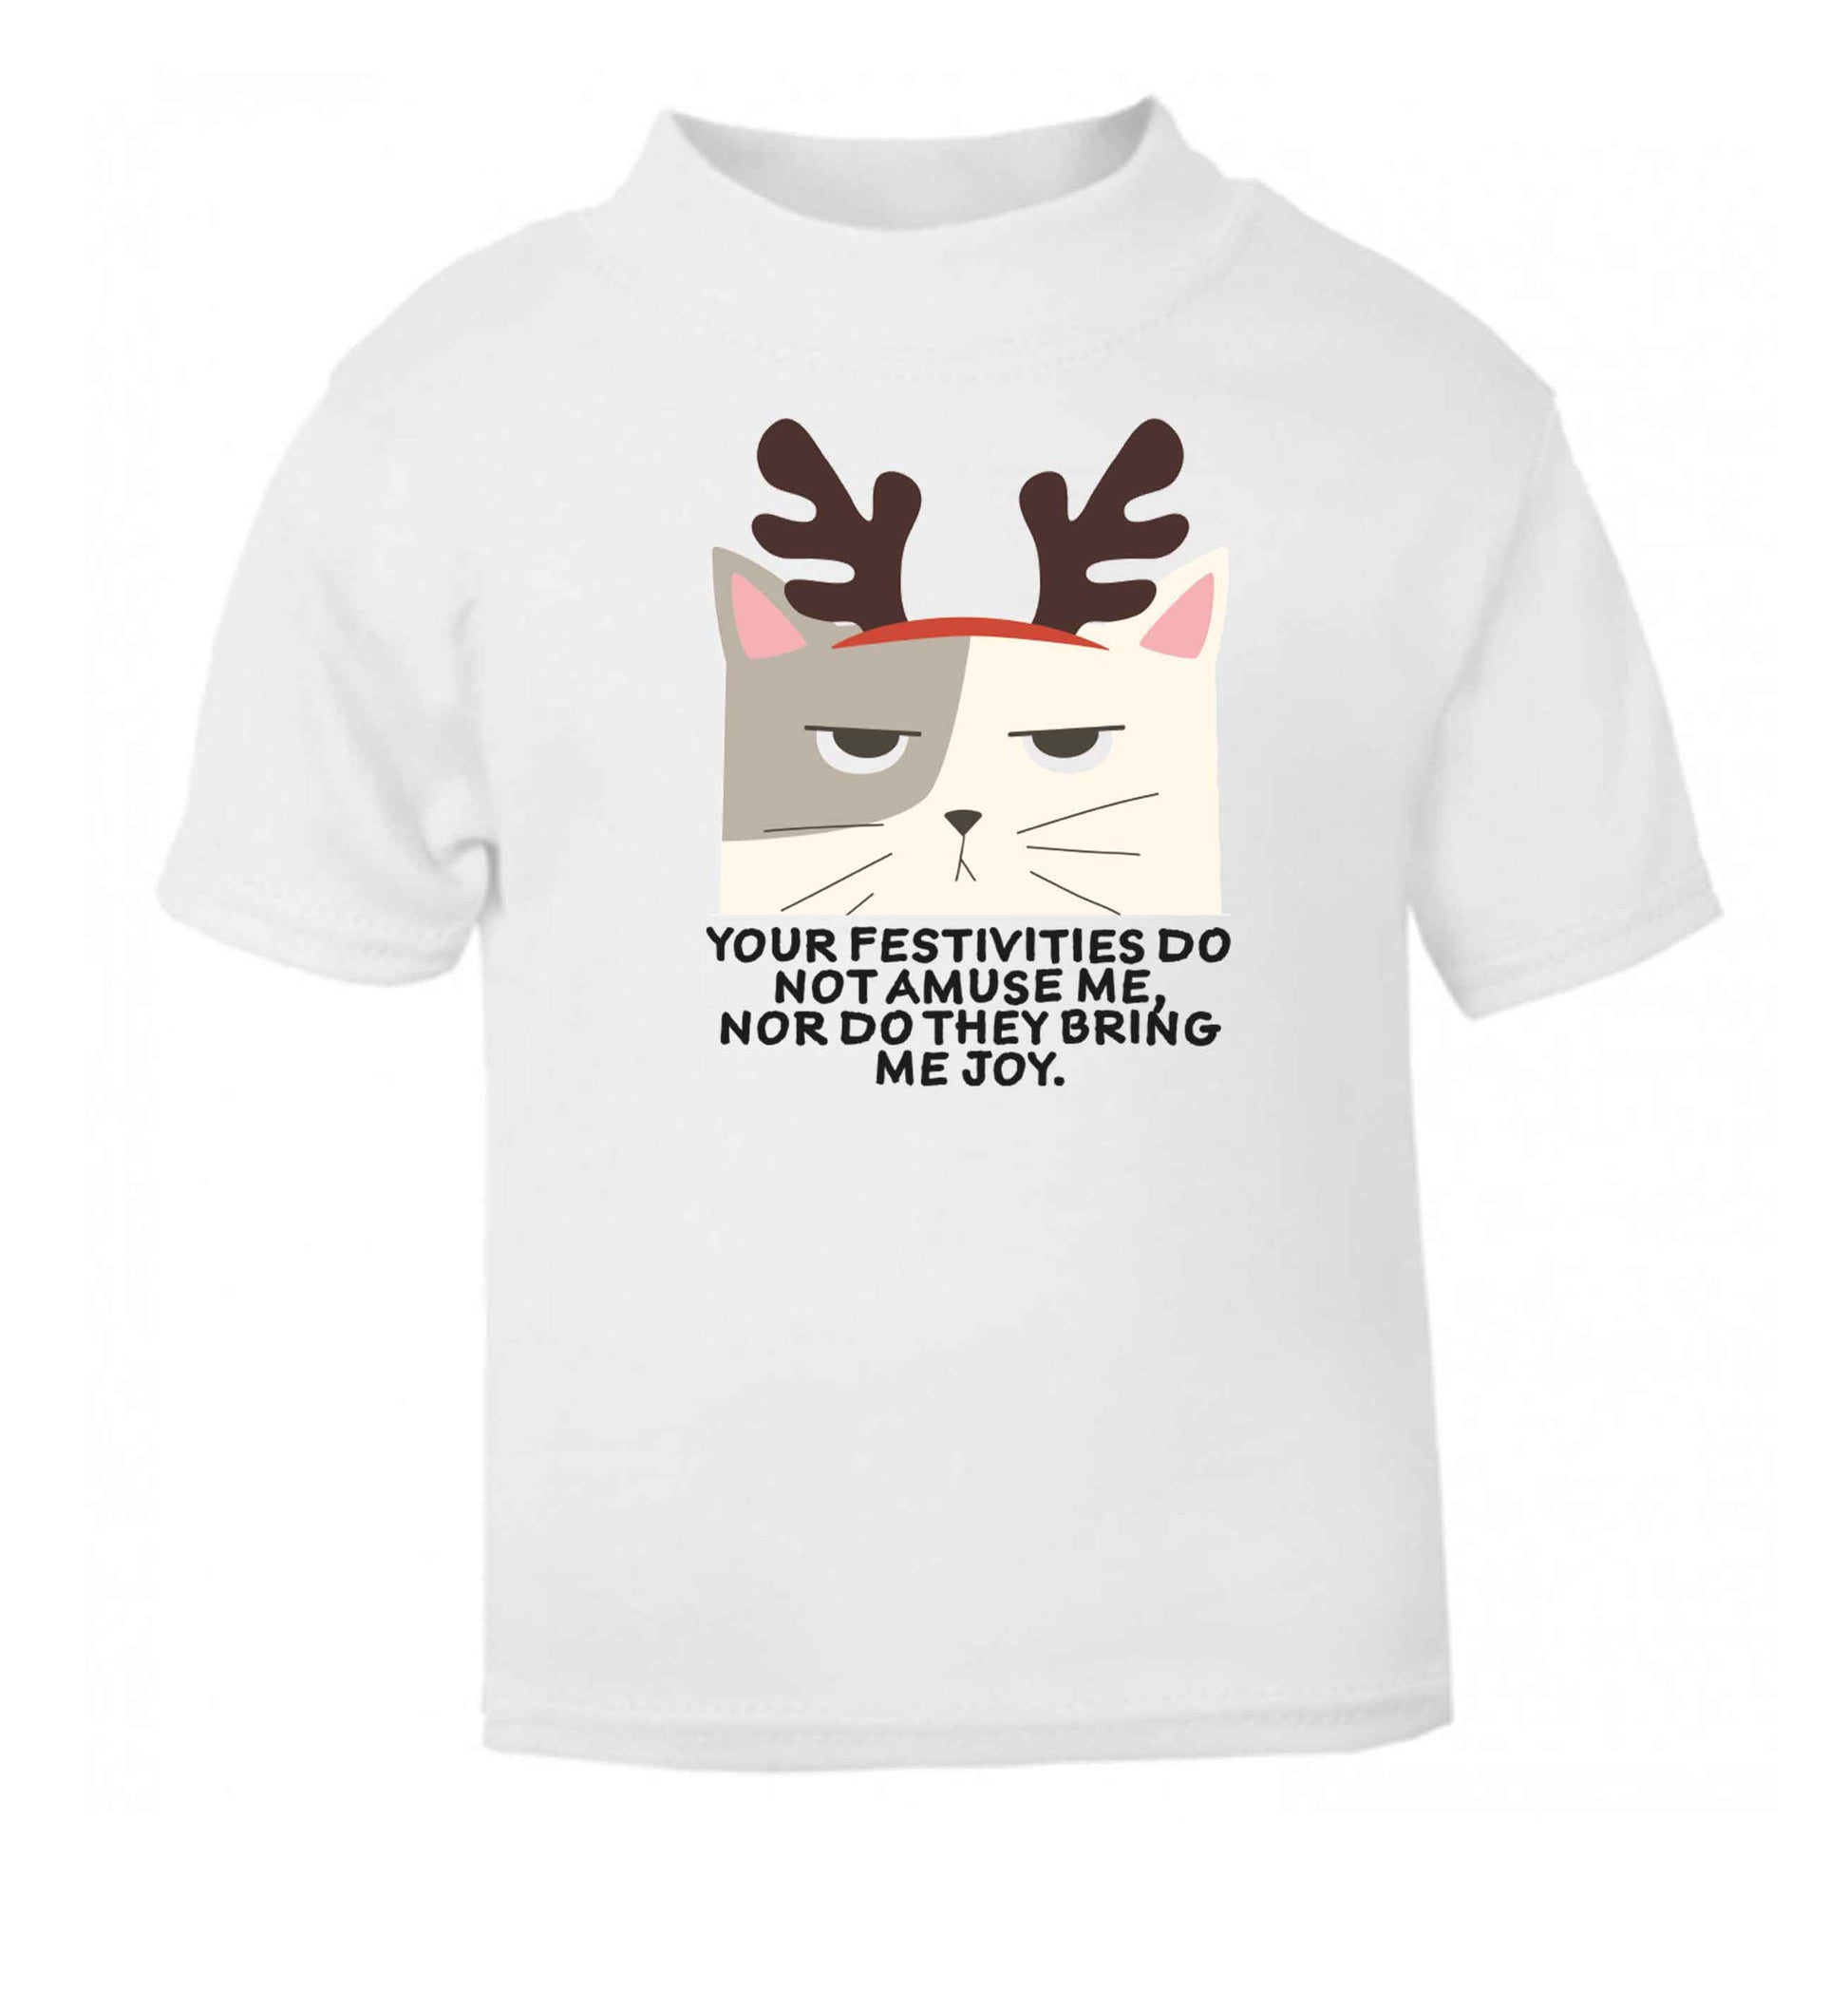 Your festivities do not amuse me nor do they bring me joy baby toddler Tshirt 2 Years